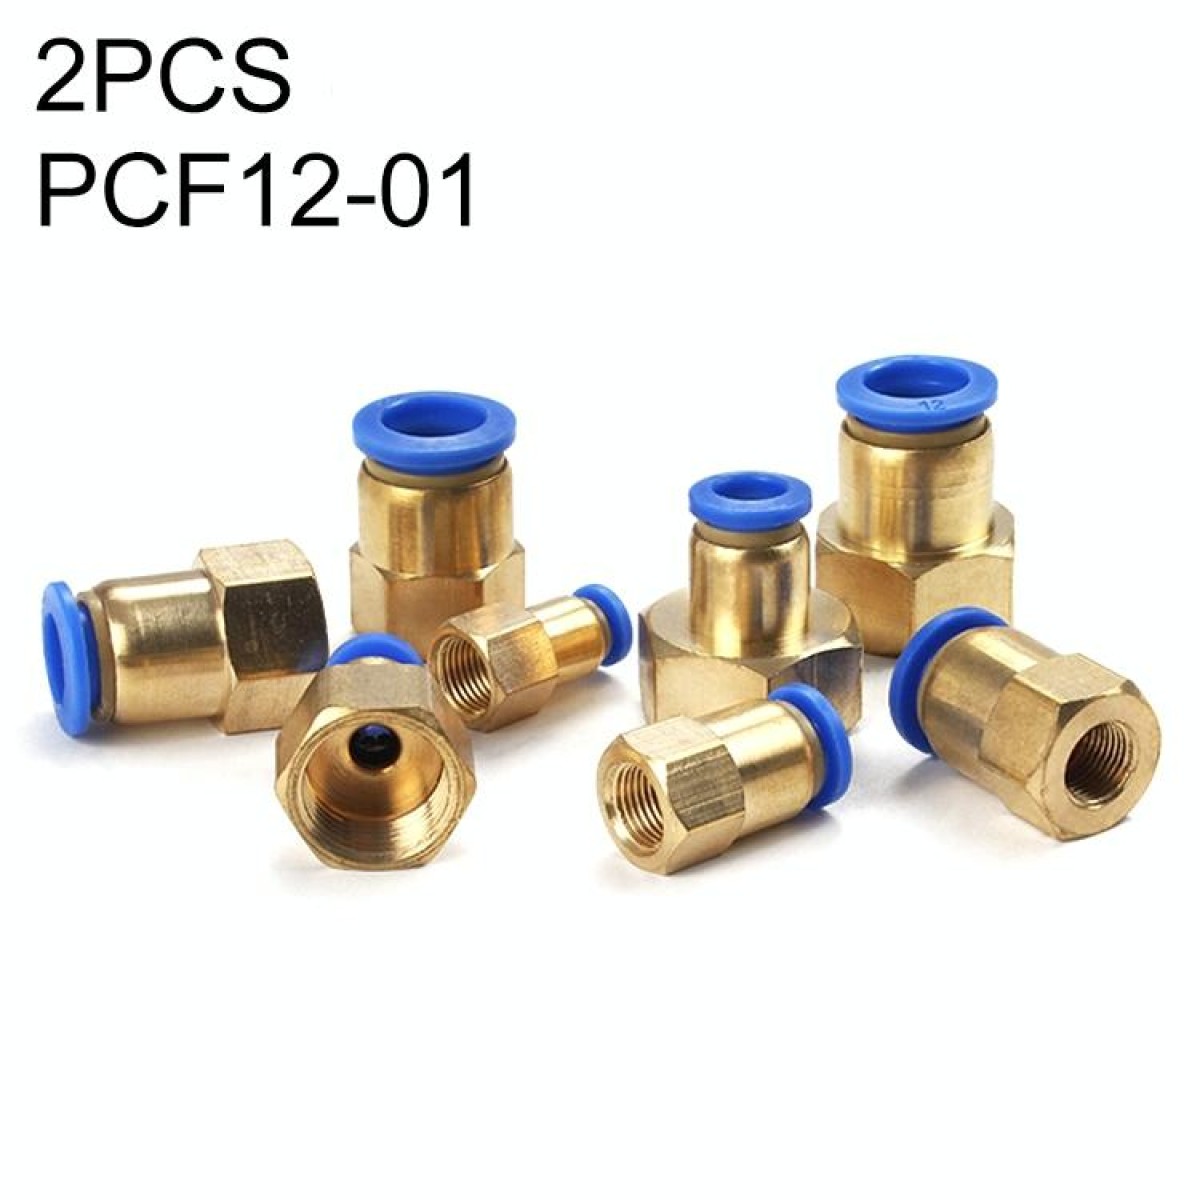 PCF12-01 LAIZE 2pcs Female Thread Straight Pneumatic Quick Connector